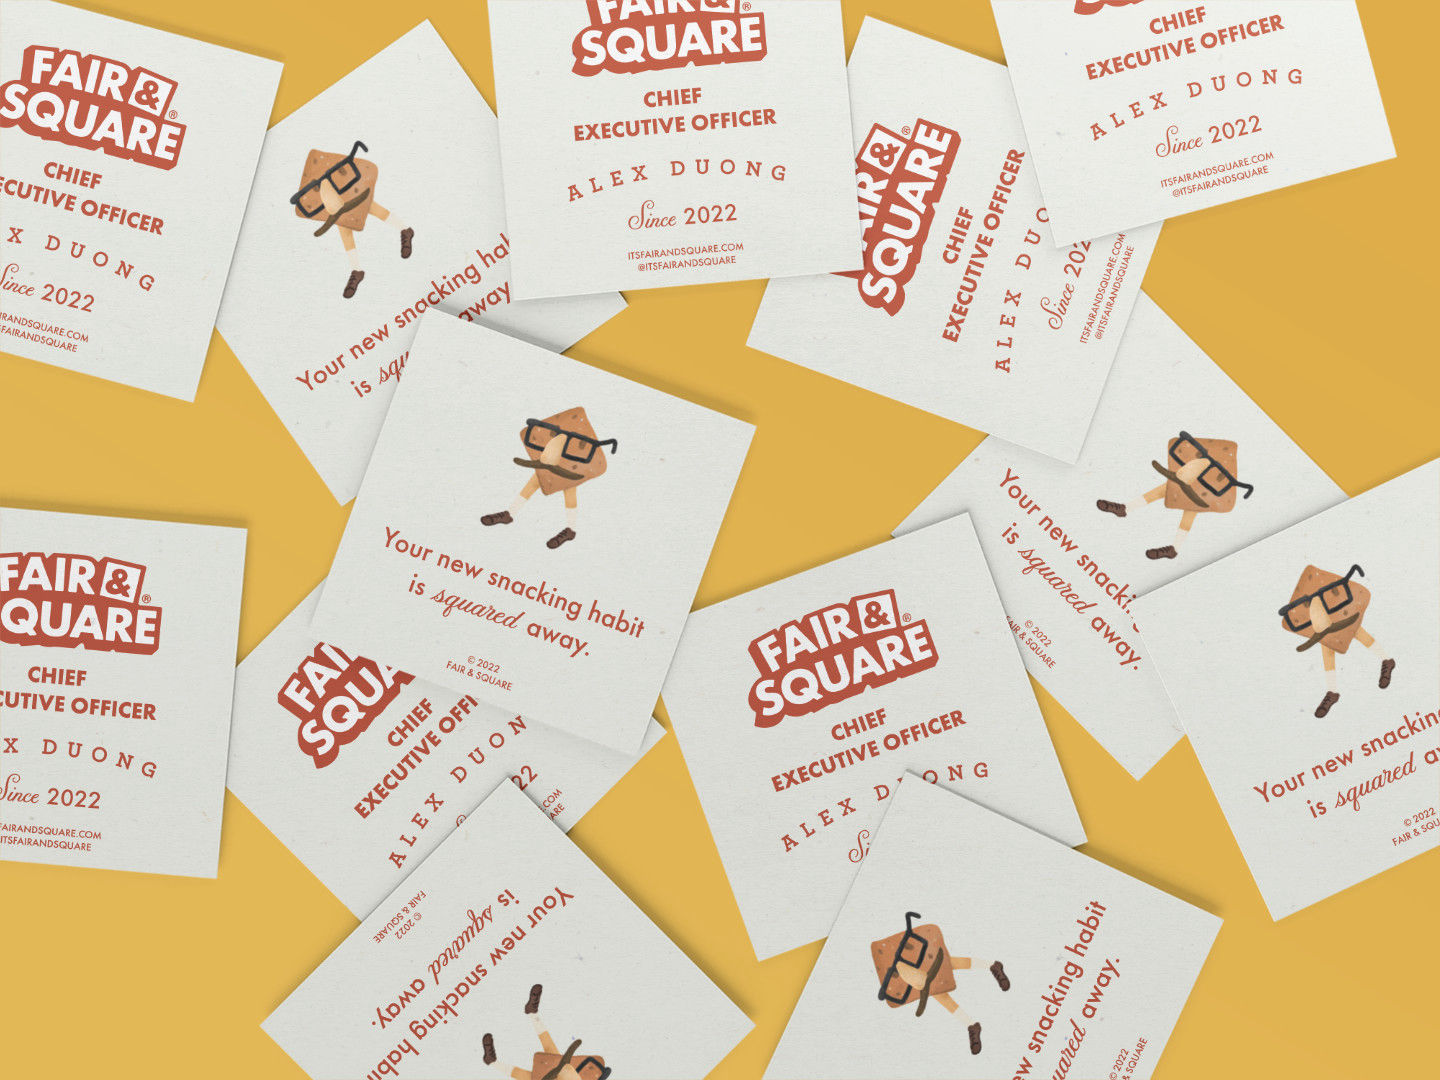 f s square business card mockup compact